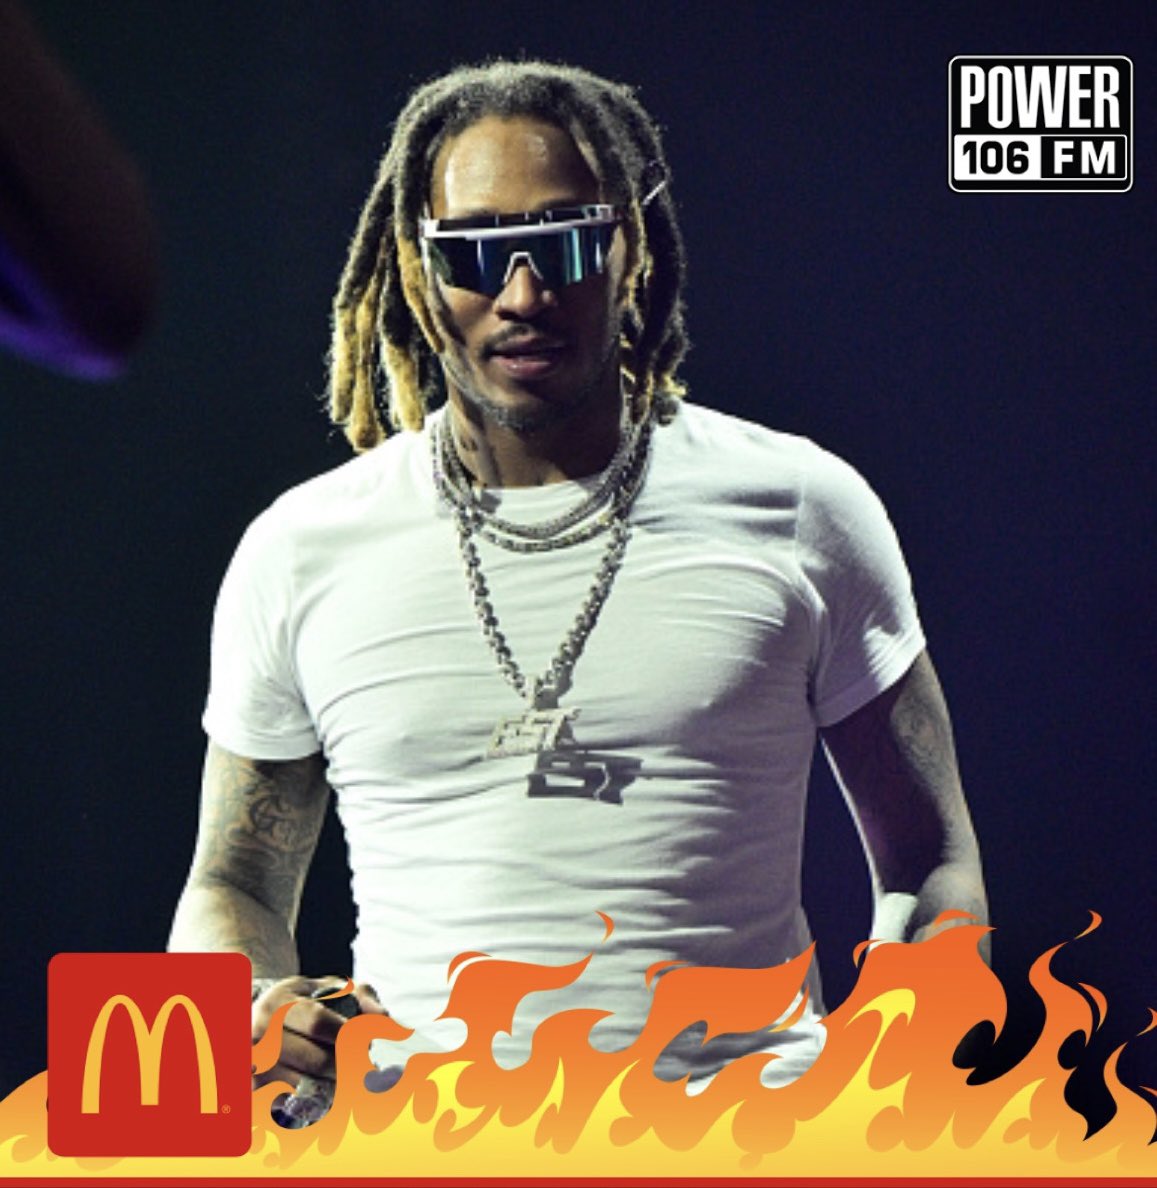 Hip Hop is all about bringing the heat! Power 106 and McDonald’s salute the hottest in Hip Hop for their contributions. Today we salute #Future! McDonald’s is also turning up the heat with their Spicy McNuggets with aged cayenne and chili pepper, it’s a must try!